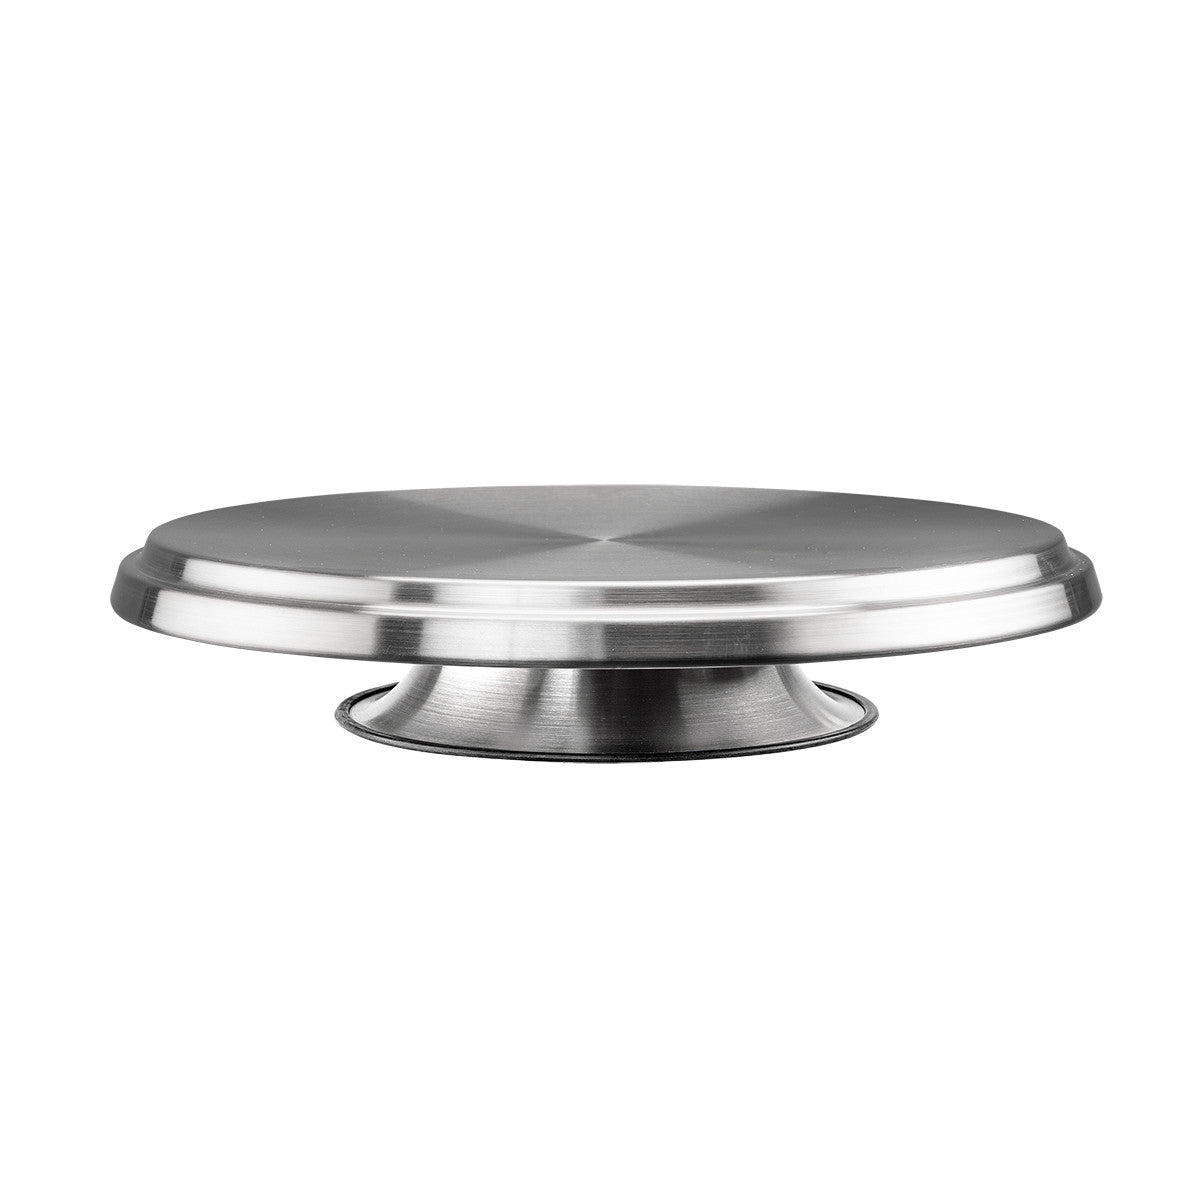 ROTATING CAKE STAND 32 cm S/S